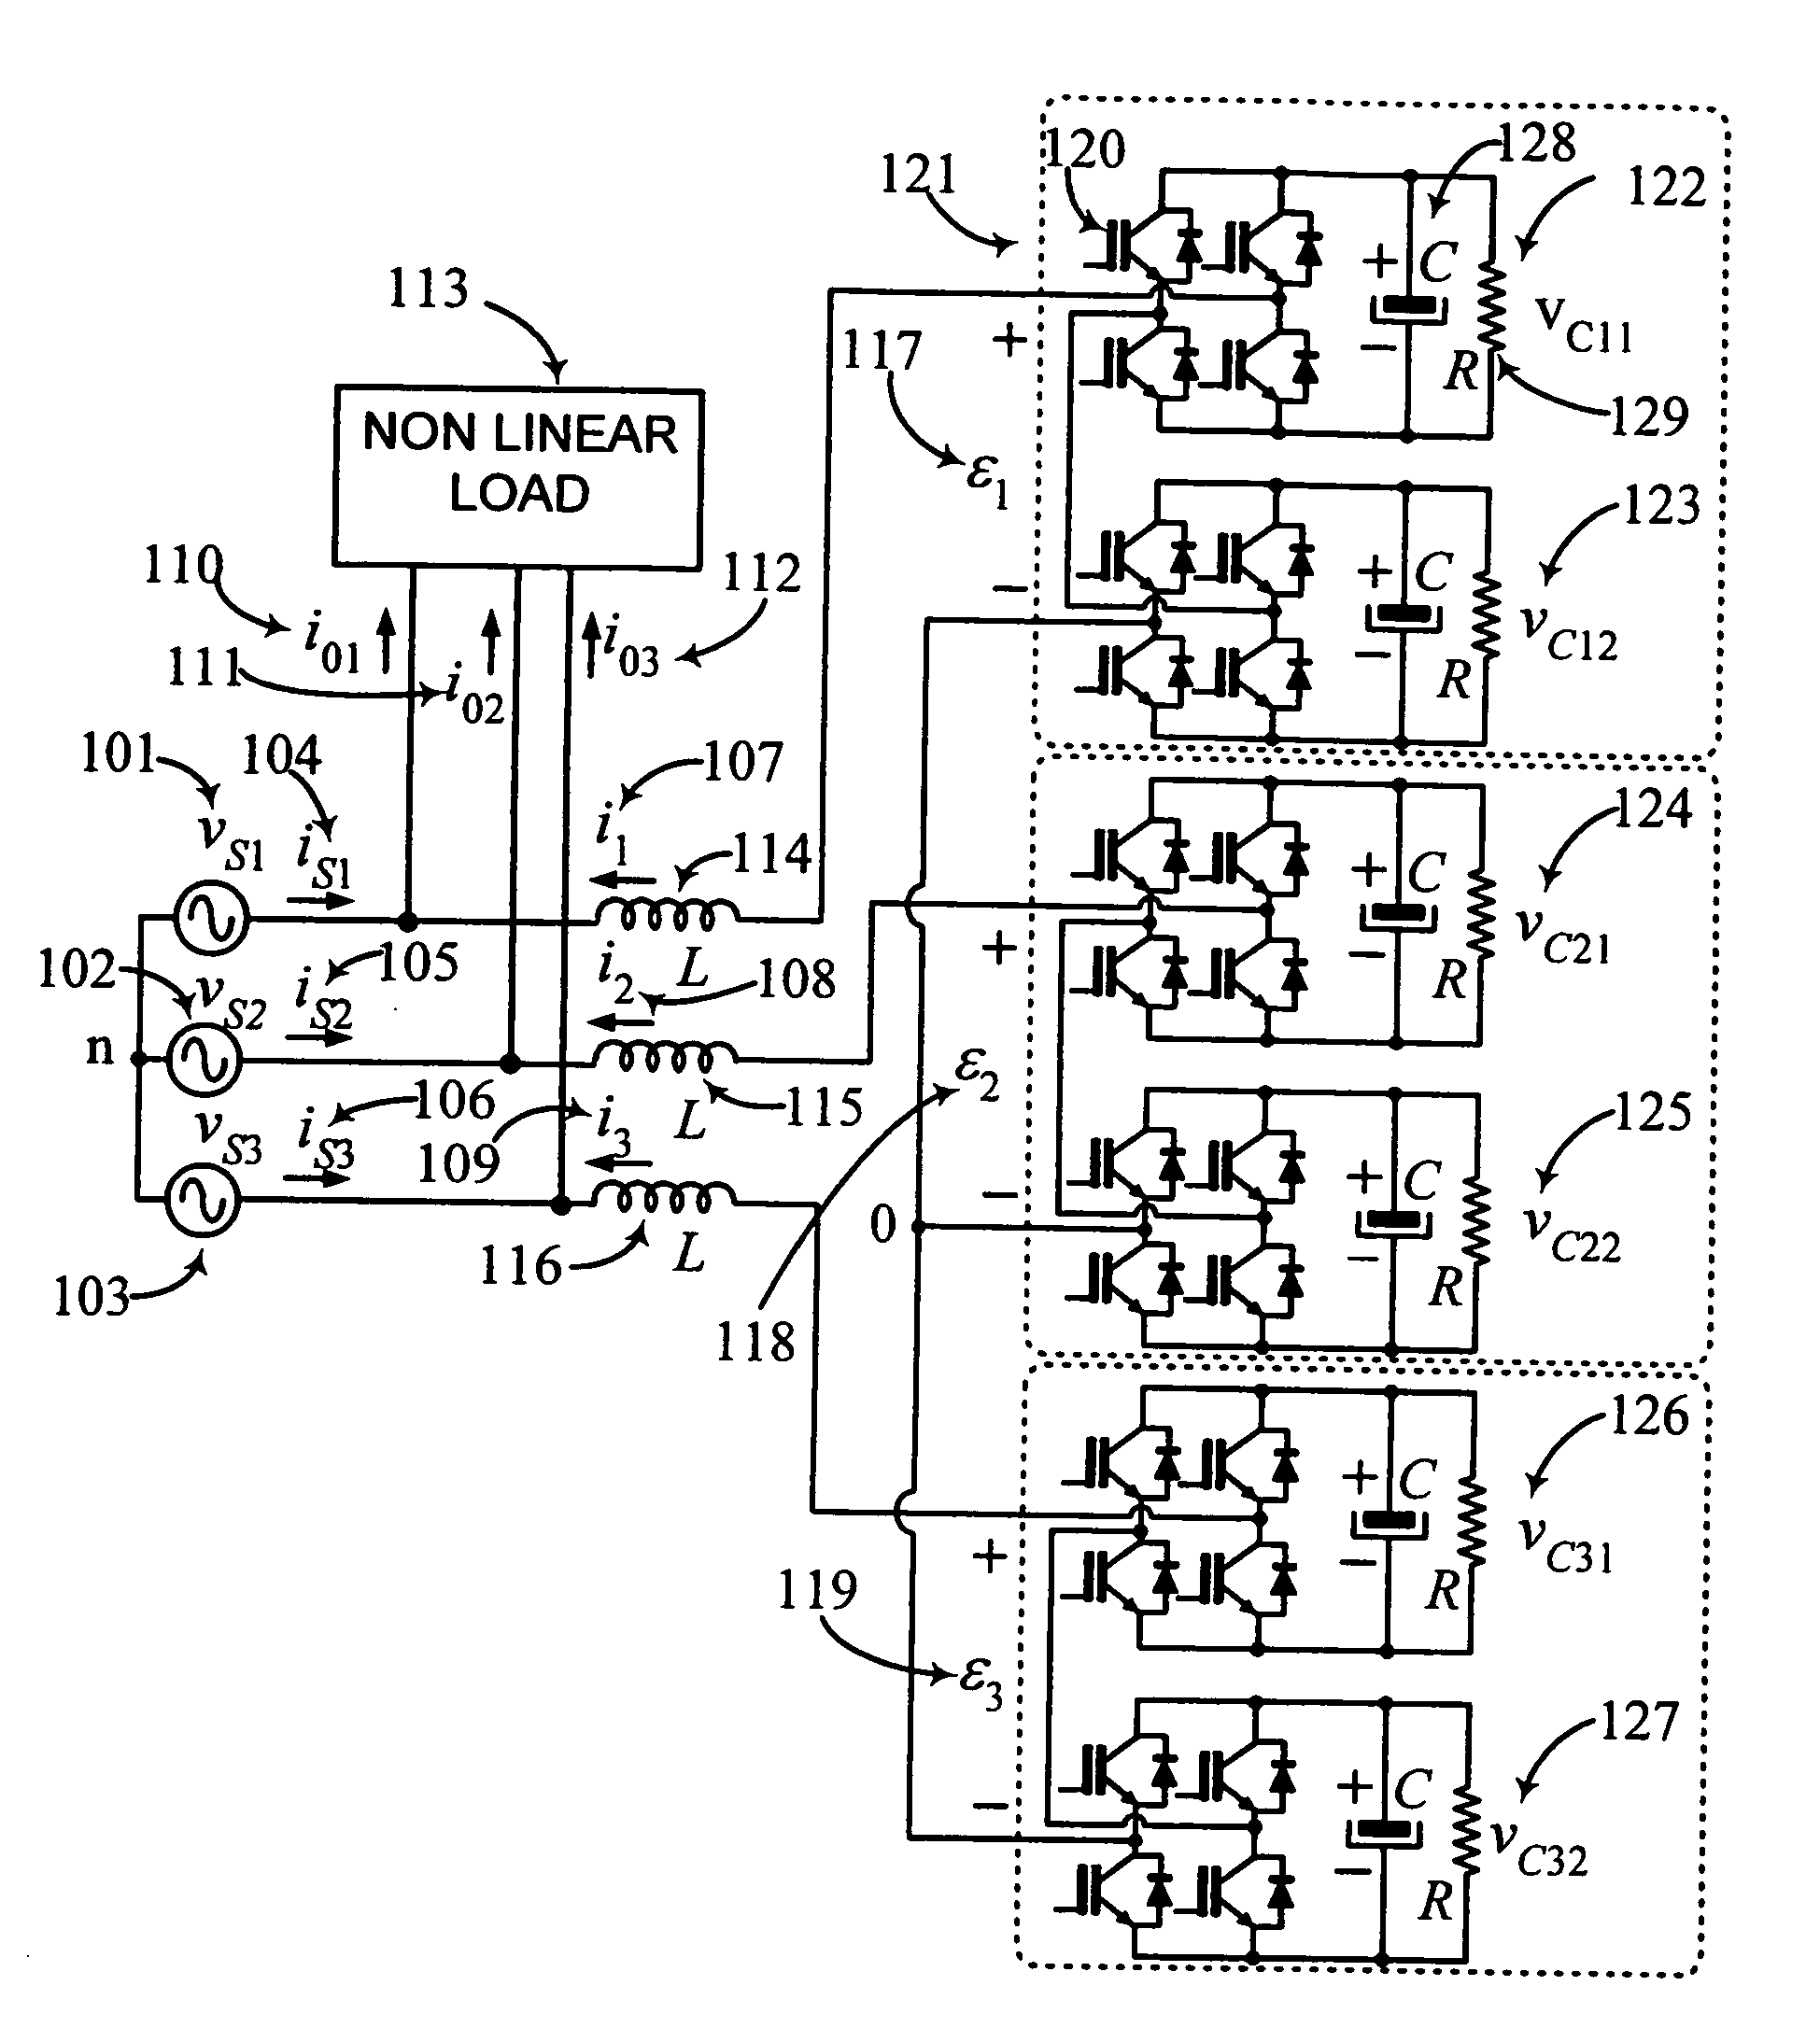 Controller for the three-phase cascade multilevel converter used as shunt active filter in unbalanced operation with guaranteed capacitors voltages balance